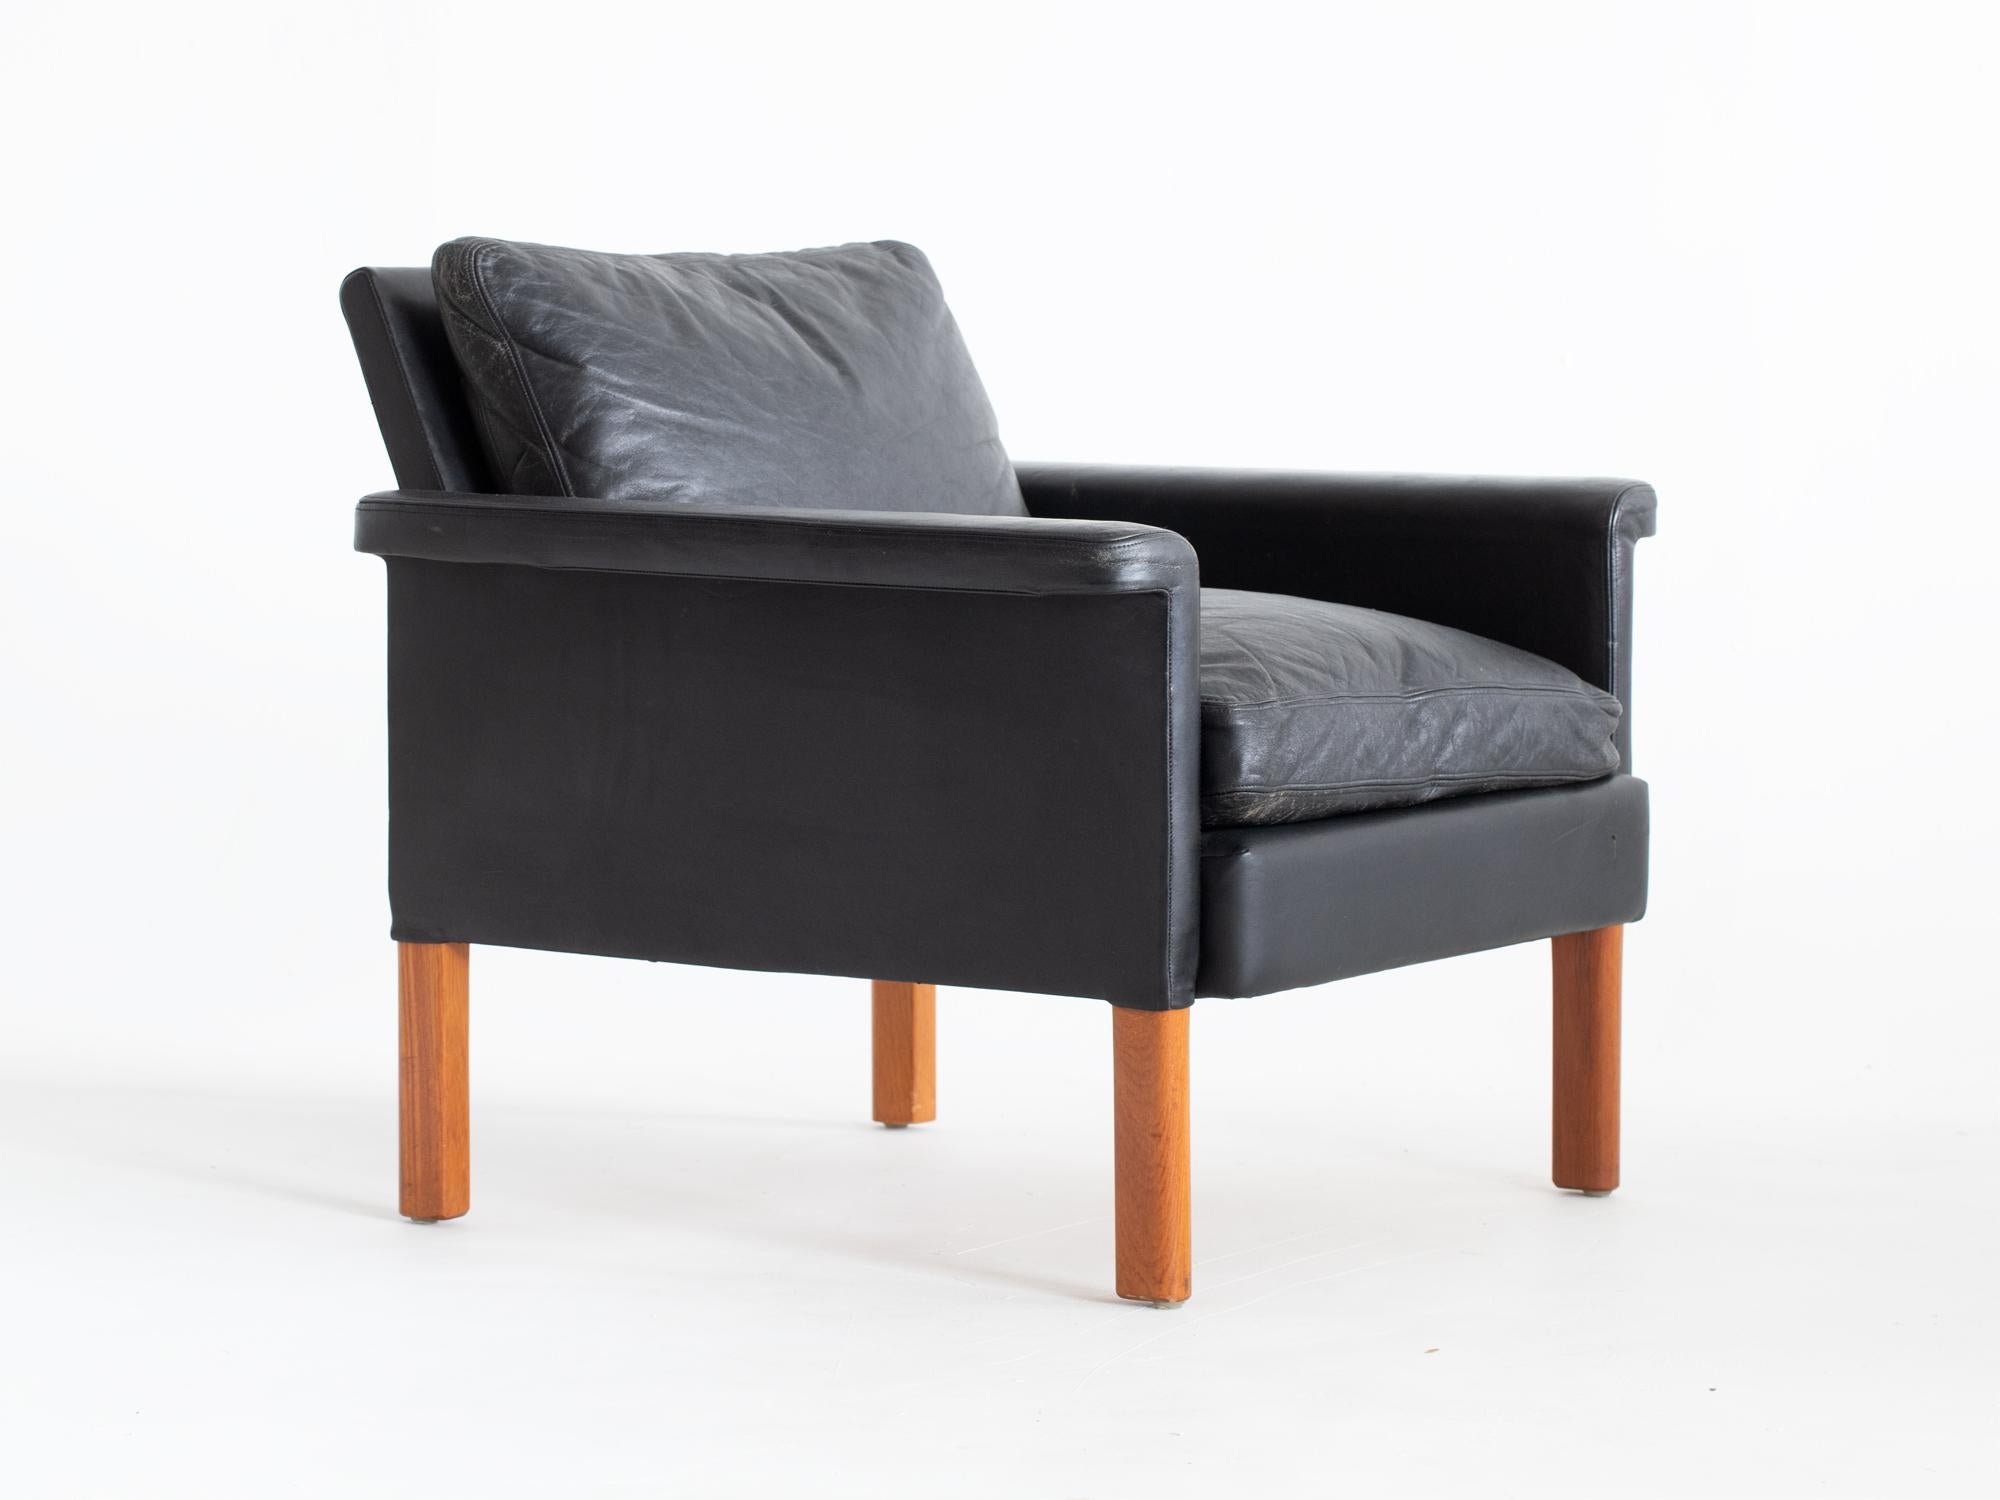 A mid-century leather armchair by Mio. Swedish, c. 1960s.

Sturdy beech frame. The original black leather upholstery is in good serviceable condition with very minor flaws.

69 x 77 x is 76 cm (27.2 x 30.3 x 29.9 